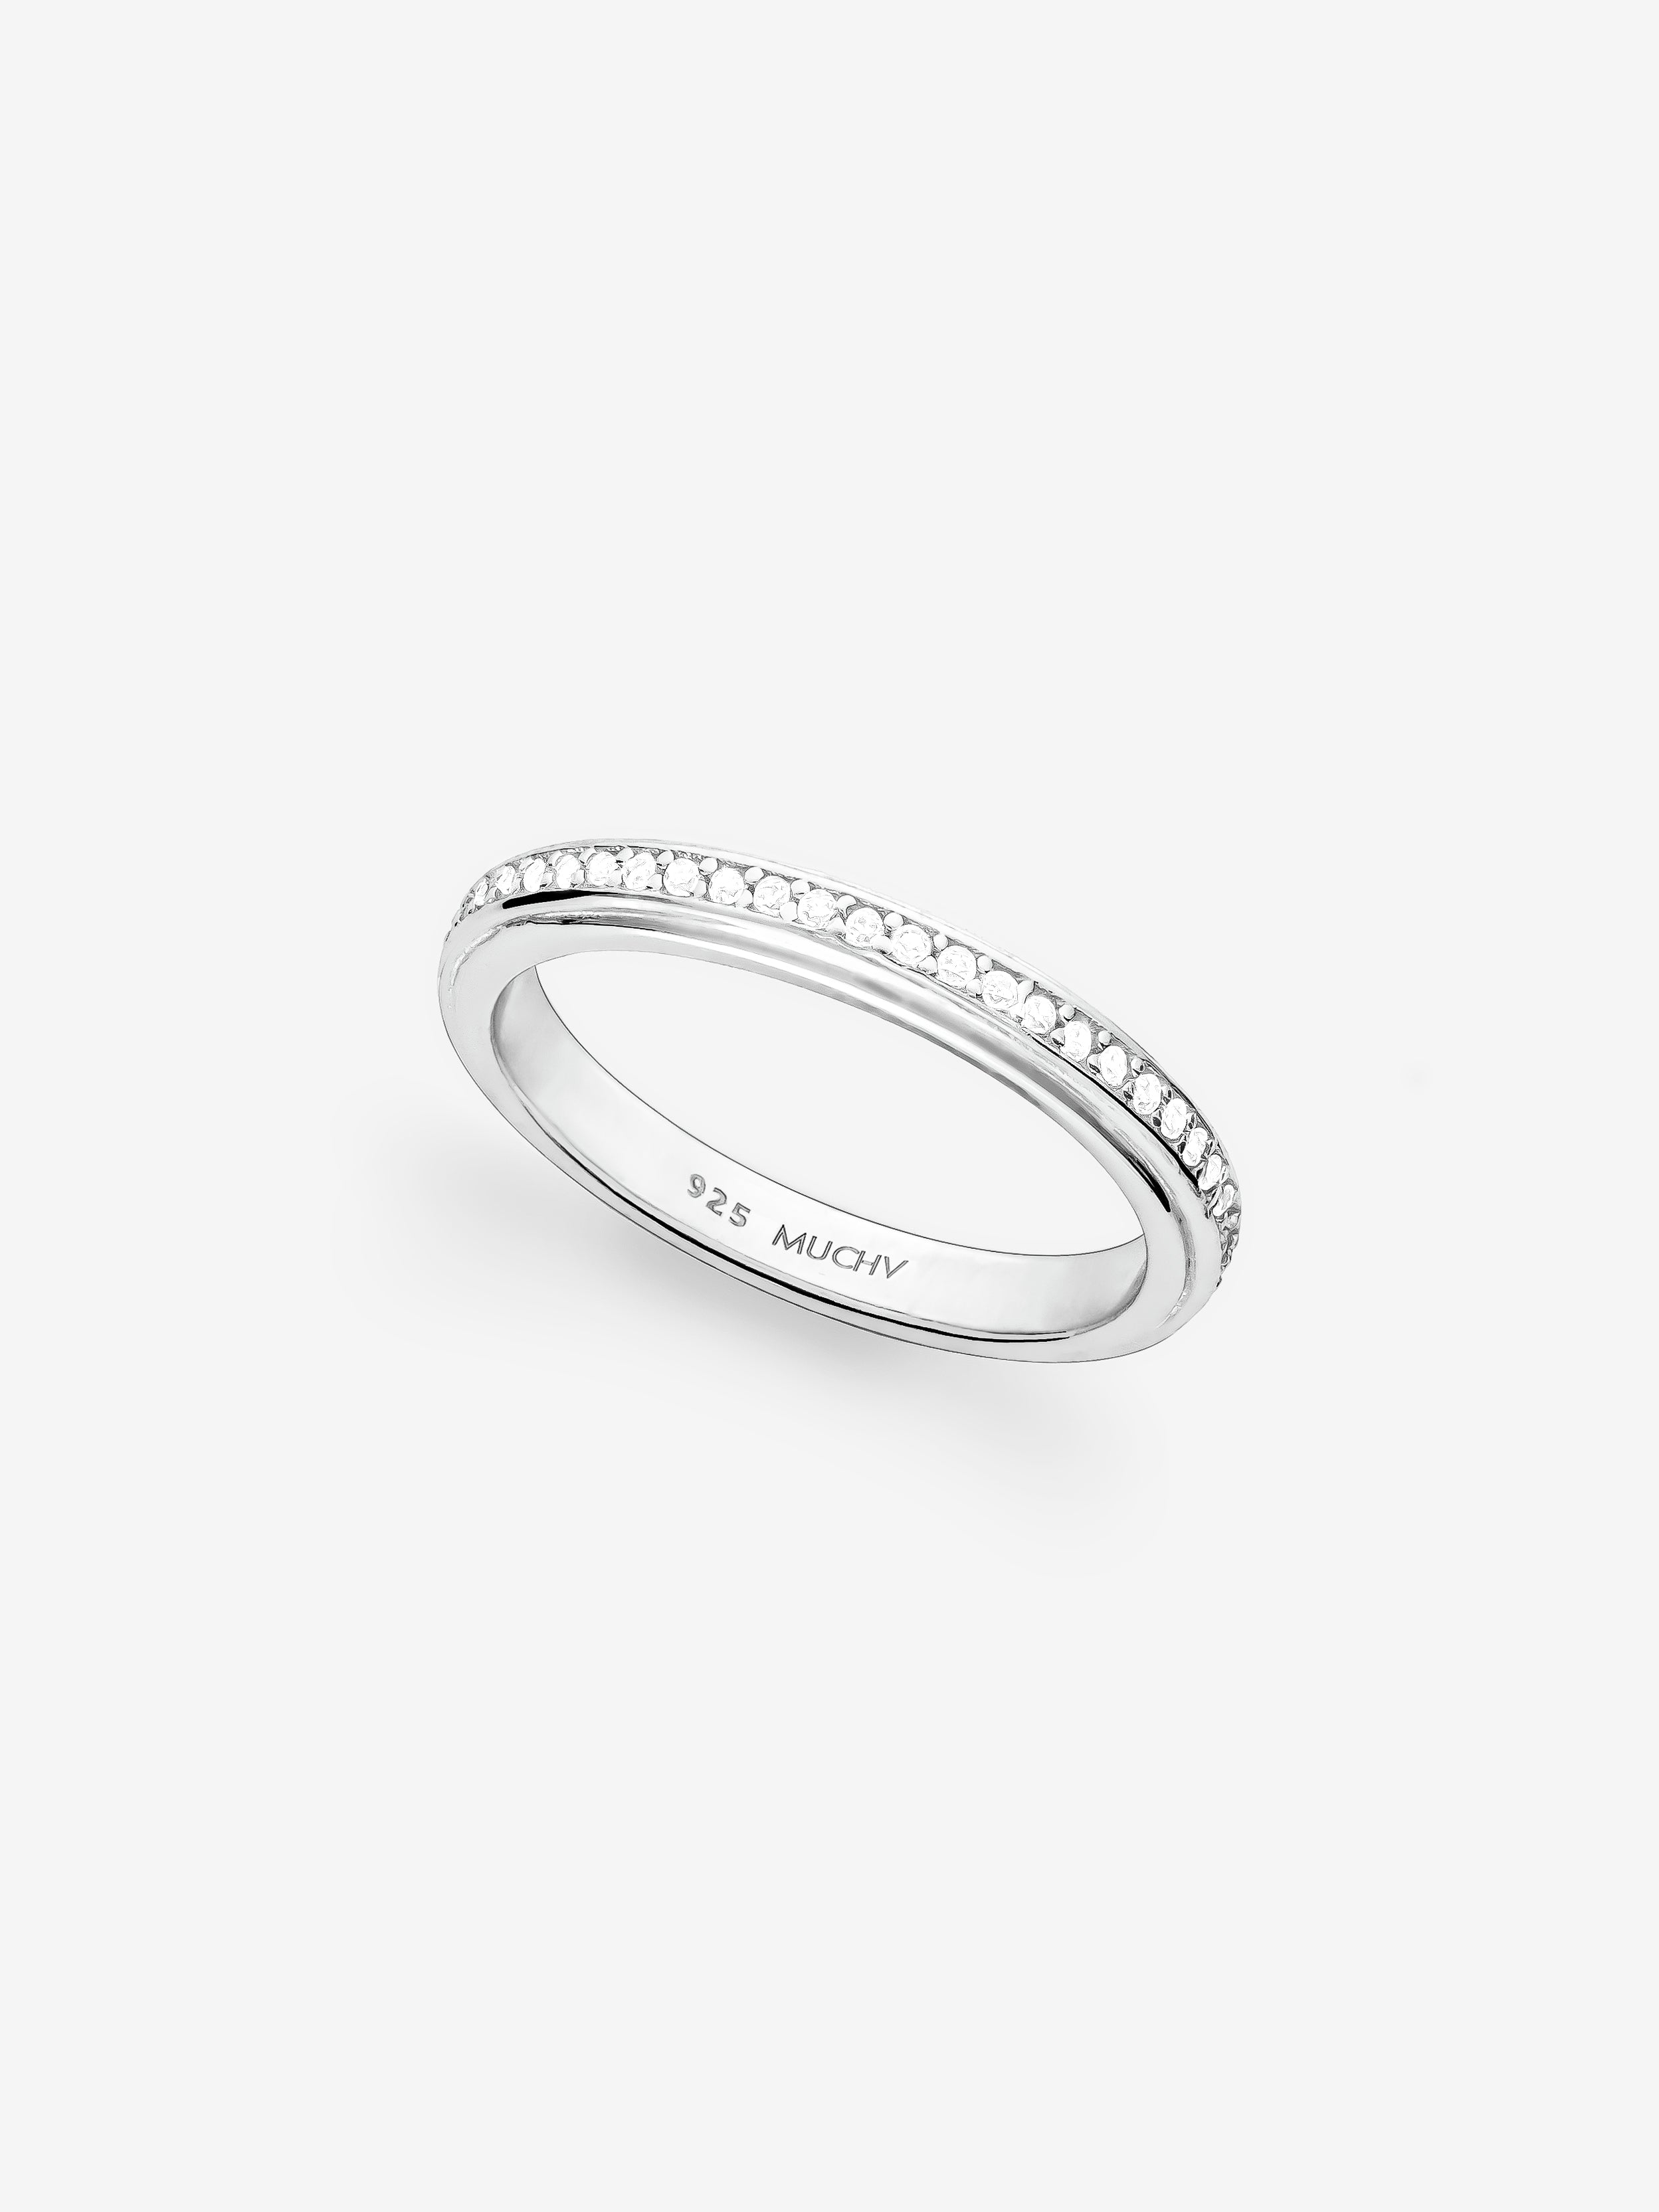 Silver Thin Stacking Ring With Sparkling Stones